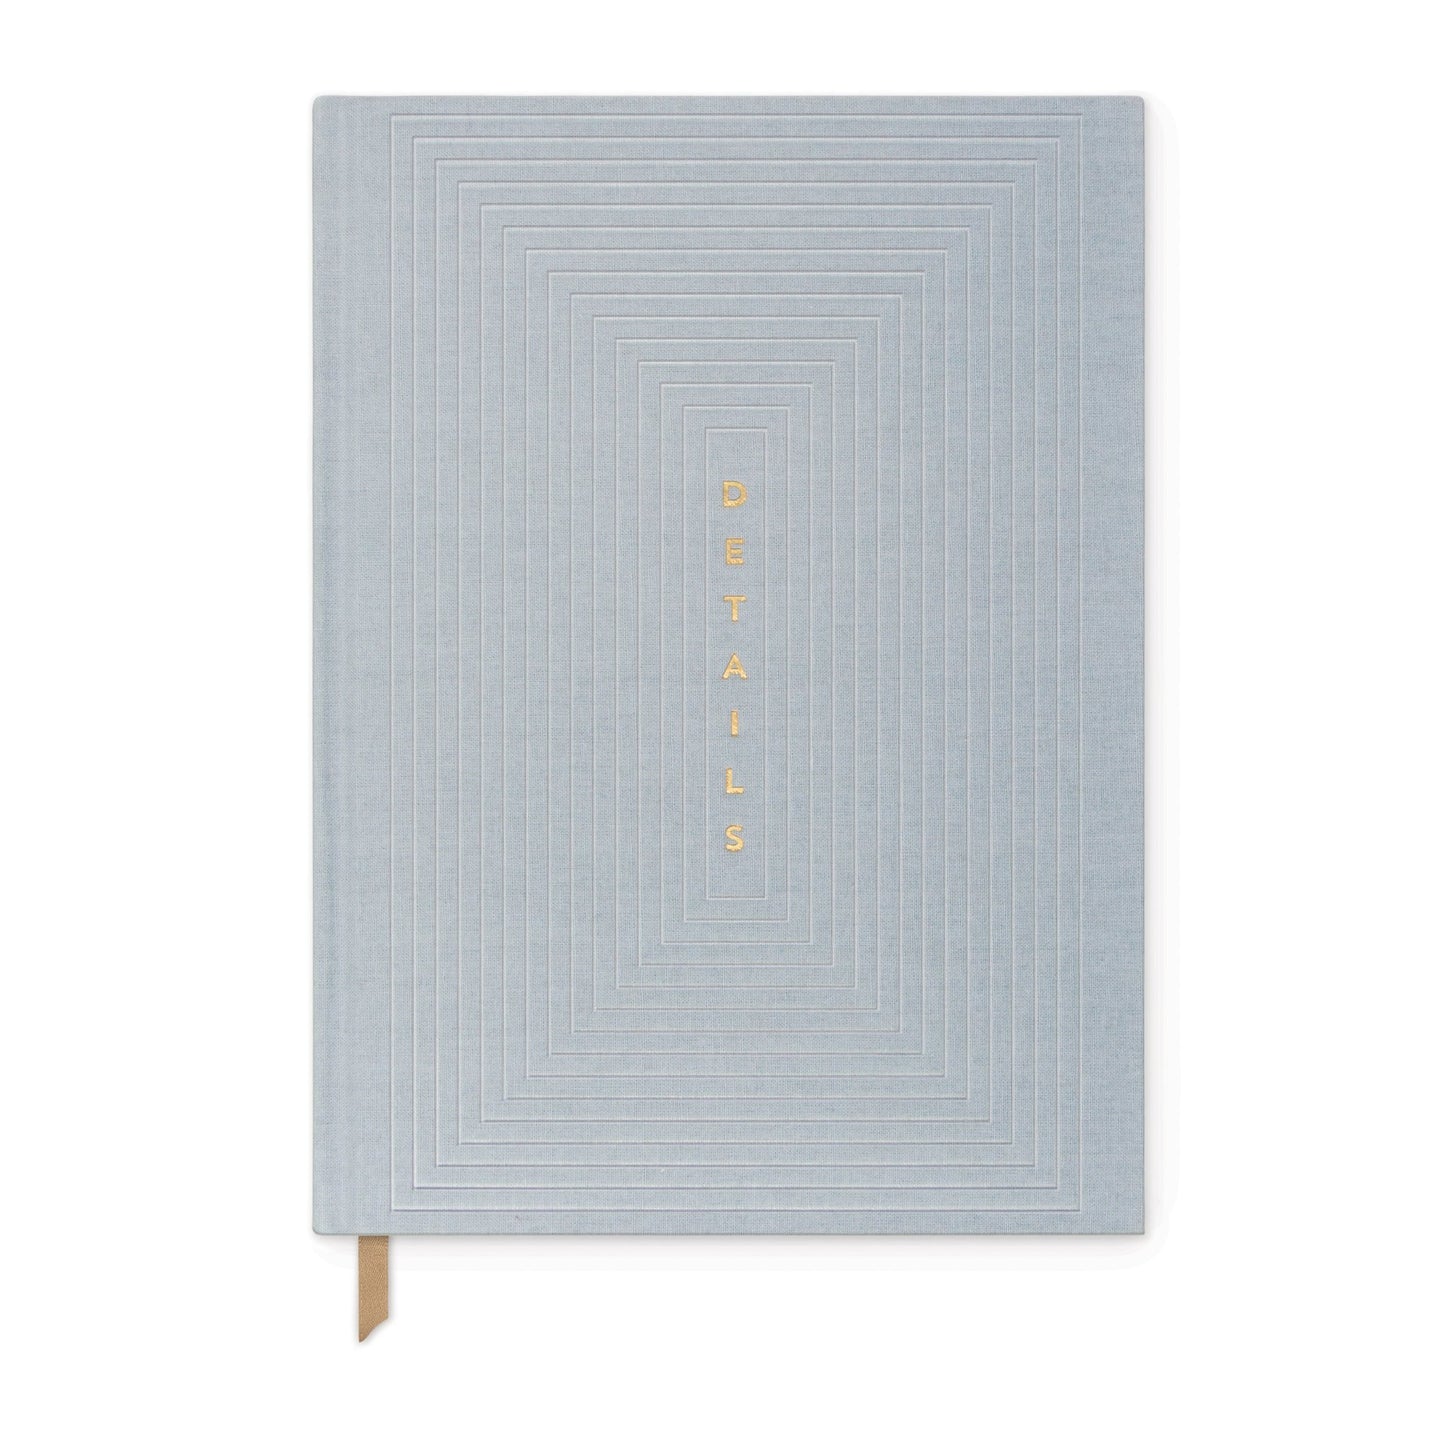 LINEAR CLOTH JOURNAL | DUSTY BLUE LINEAR BOXES "DETAILS"